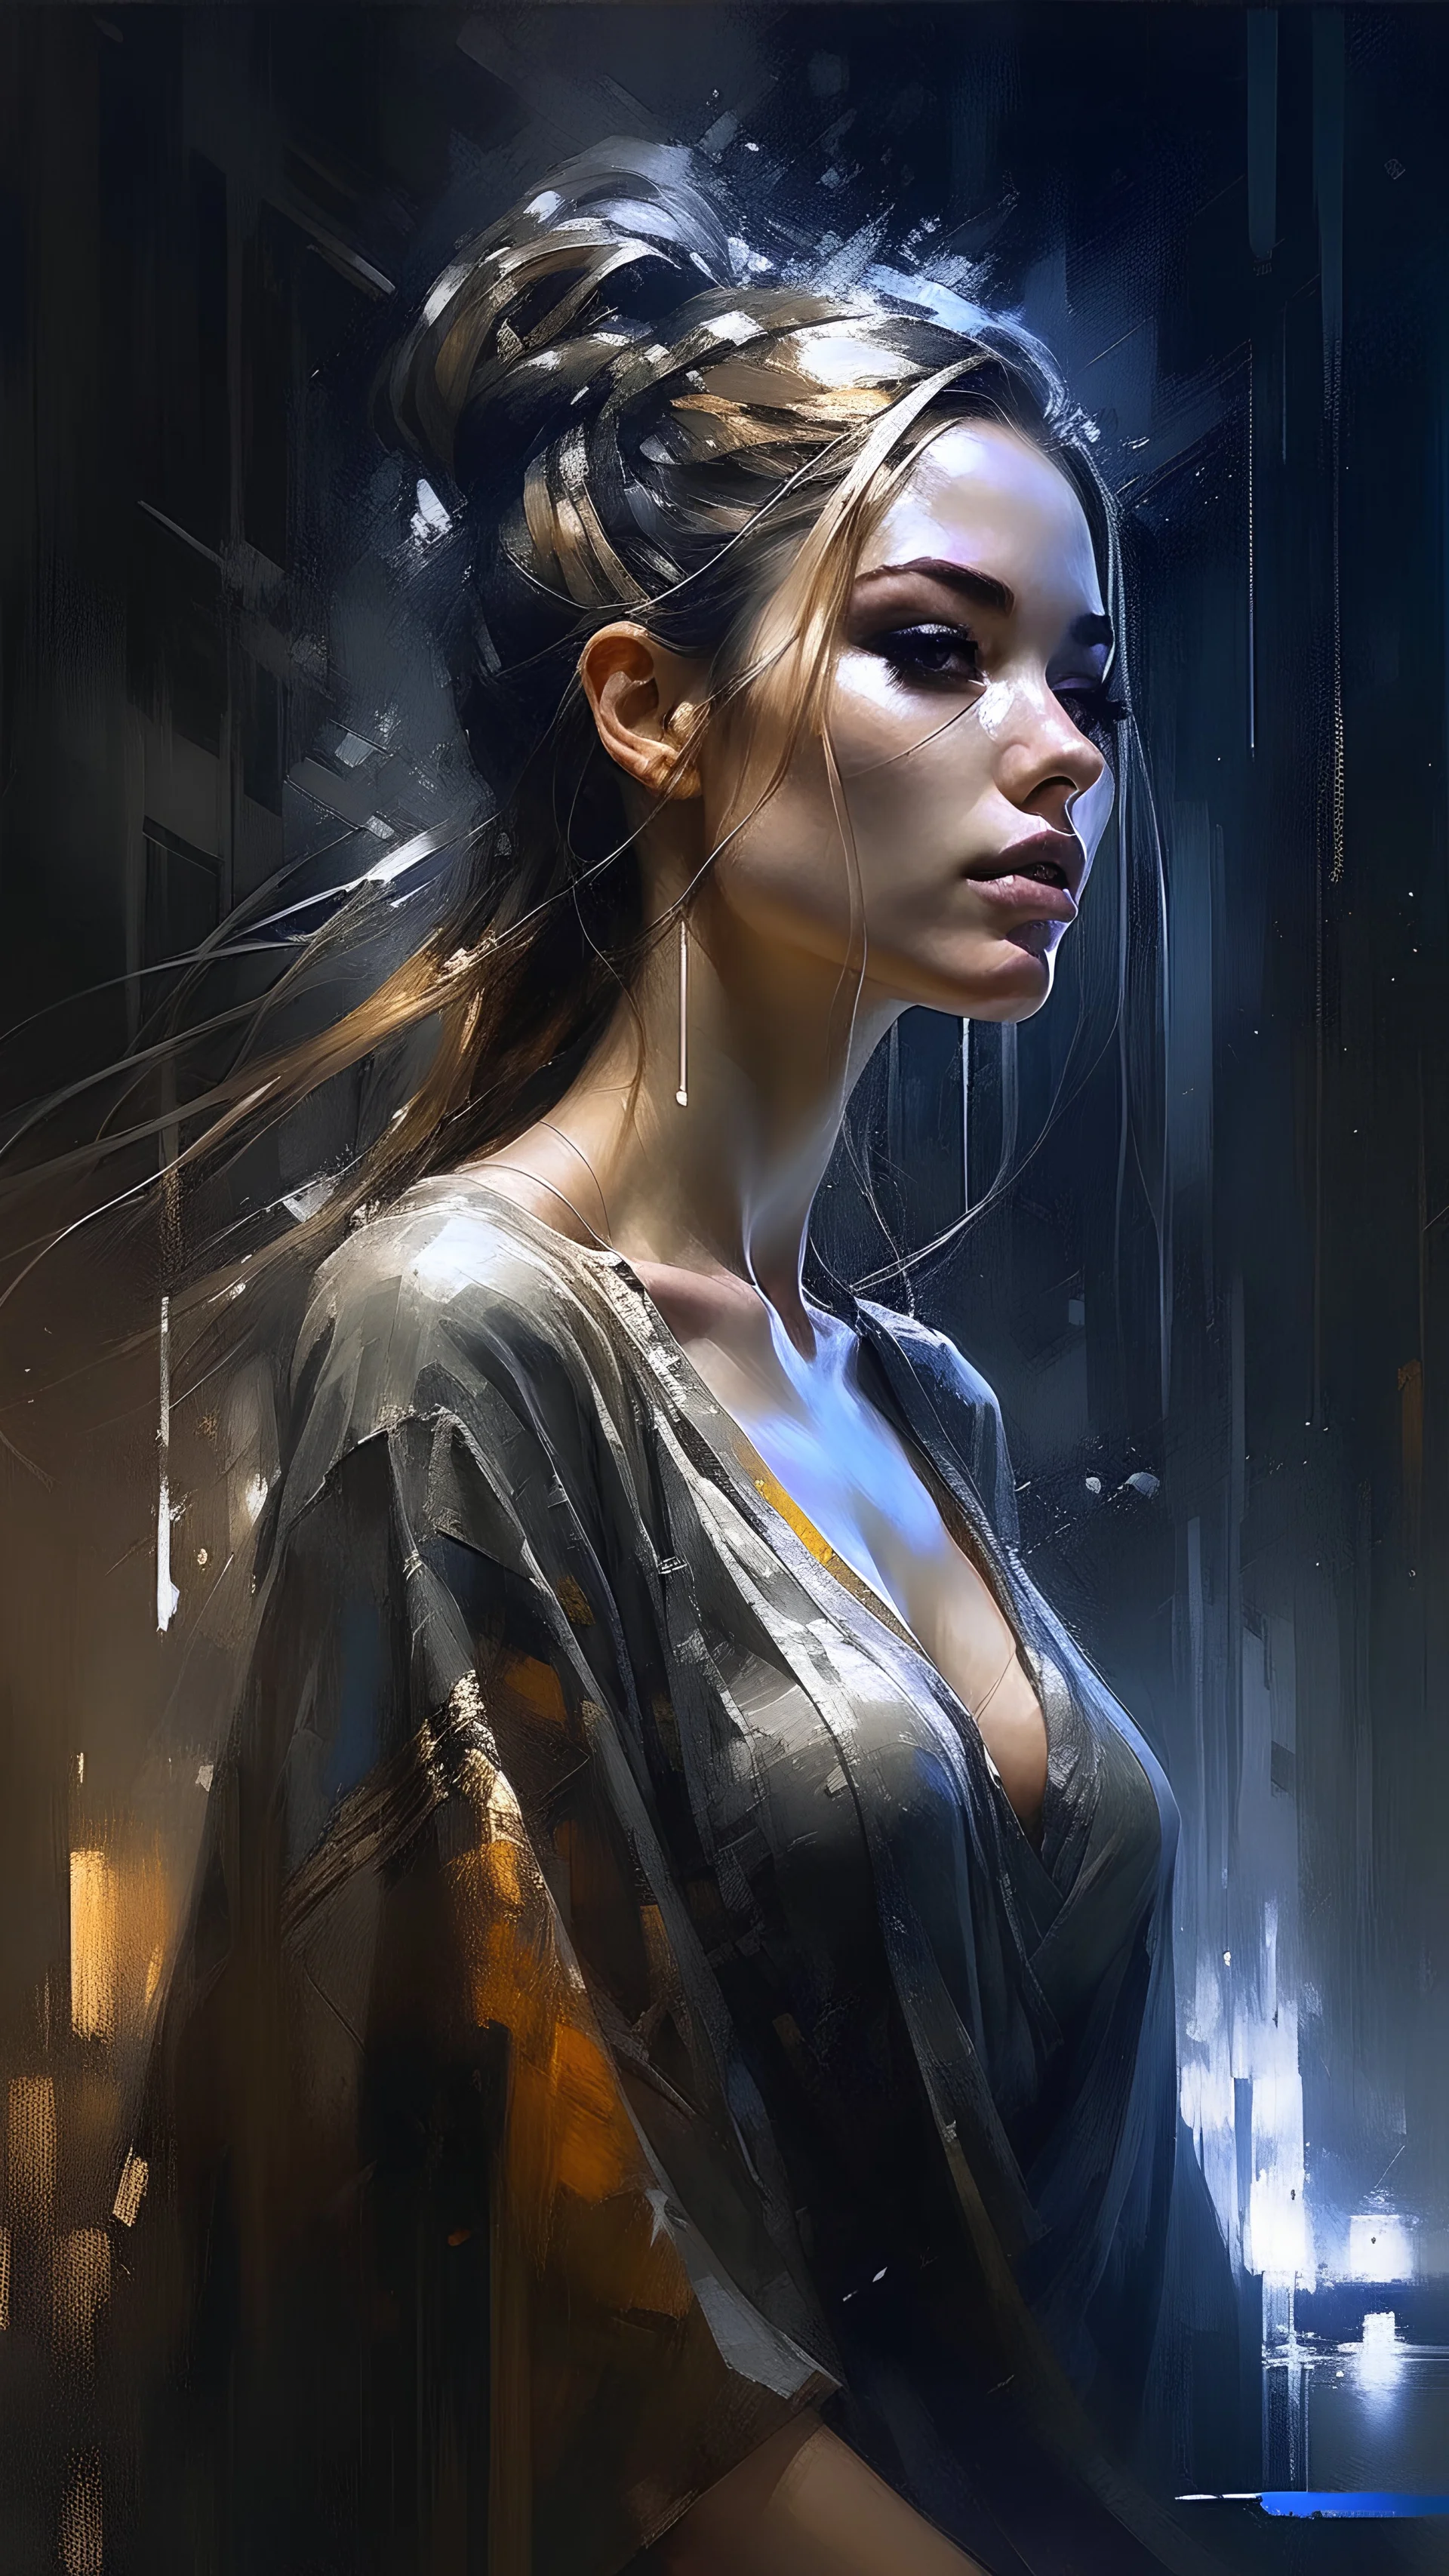 A stunningly elegant woman stands amidst a torrential downpour, captured in breathtaking artwork by renowned artists Abdel Hadi Al Gazzar, Abed Abdi, Greg Rutowski, WLOP, Alphonse Mucha, and Russ Mills. This mesmerizing image portrays the woman's natural beauty amidst the rain, her wet hair clinging gracefully to her face. The artistic medium, whether a painting, photograph, or other artistic creation, brings the scene to life in vivid detail. The image's impeccable quality showcases the impecca